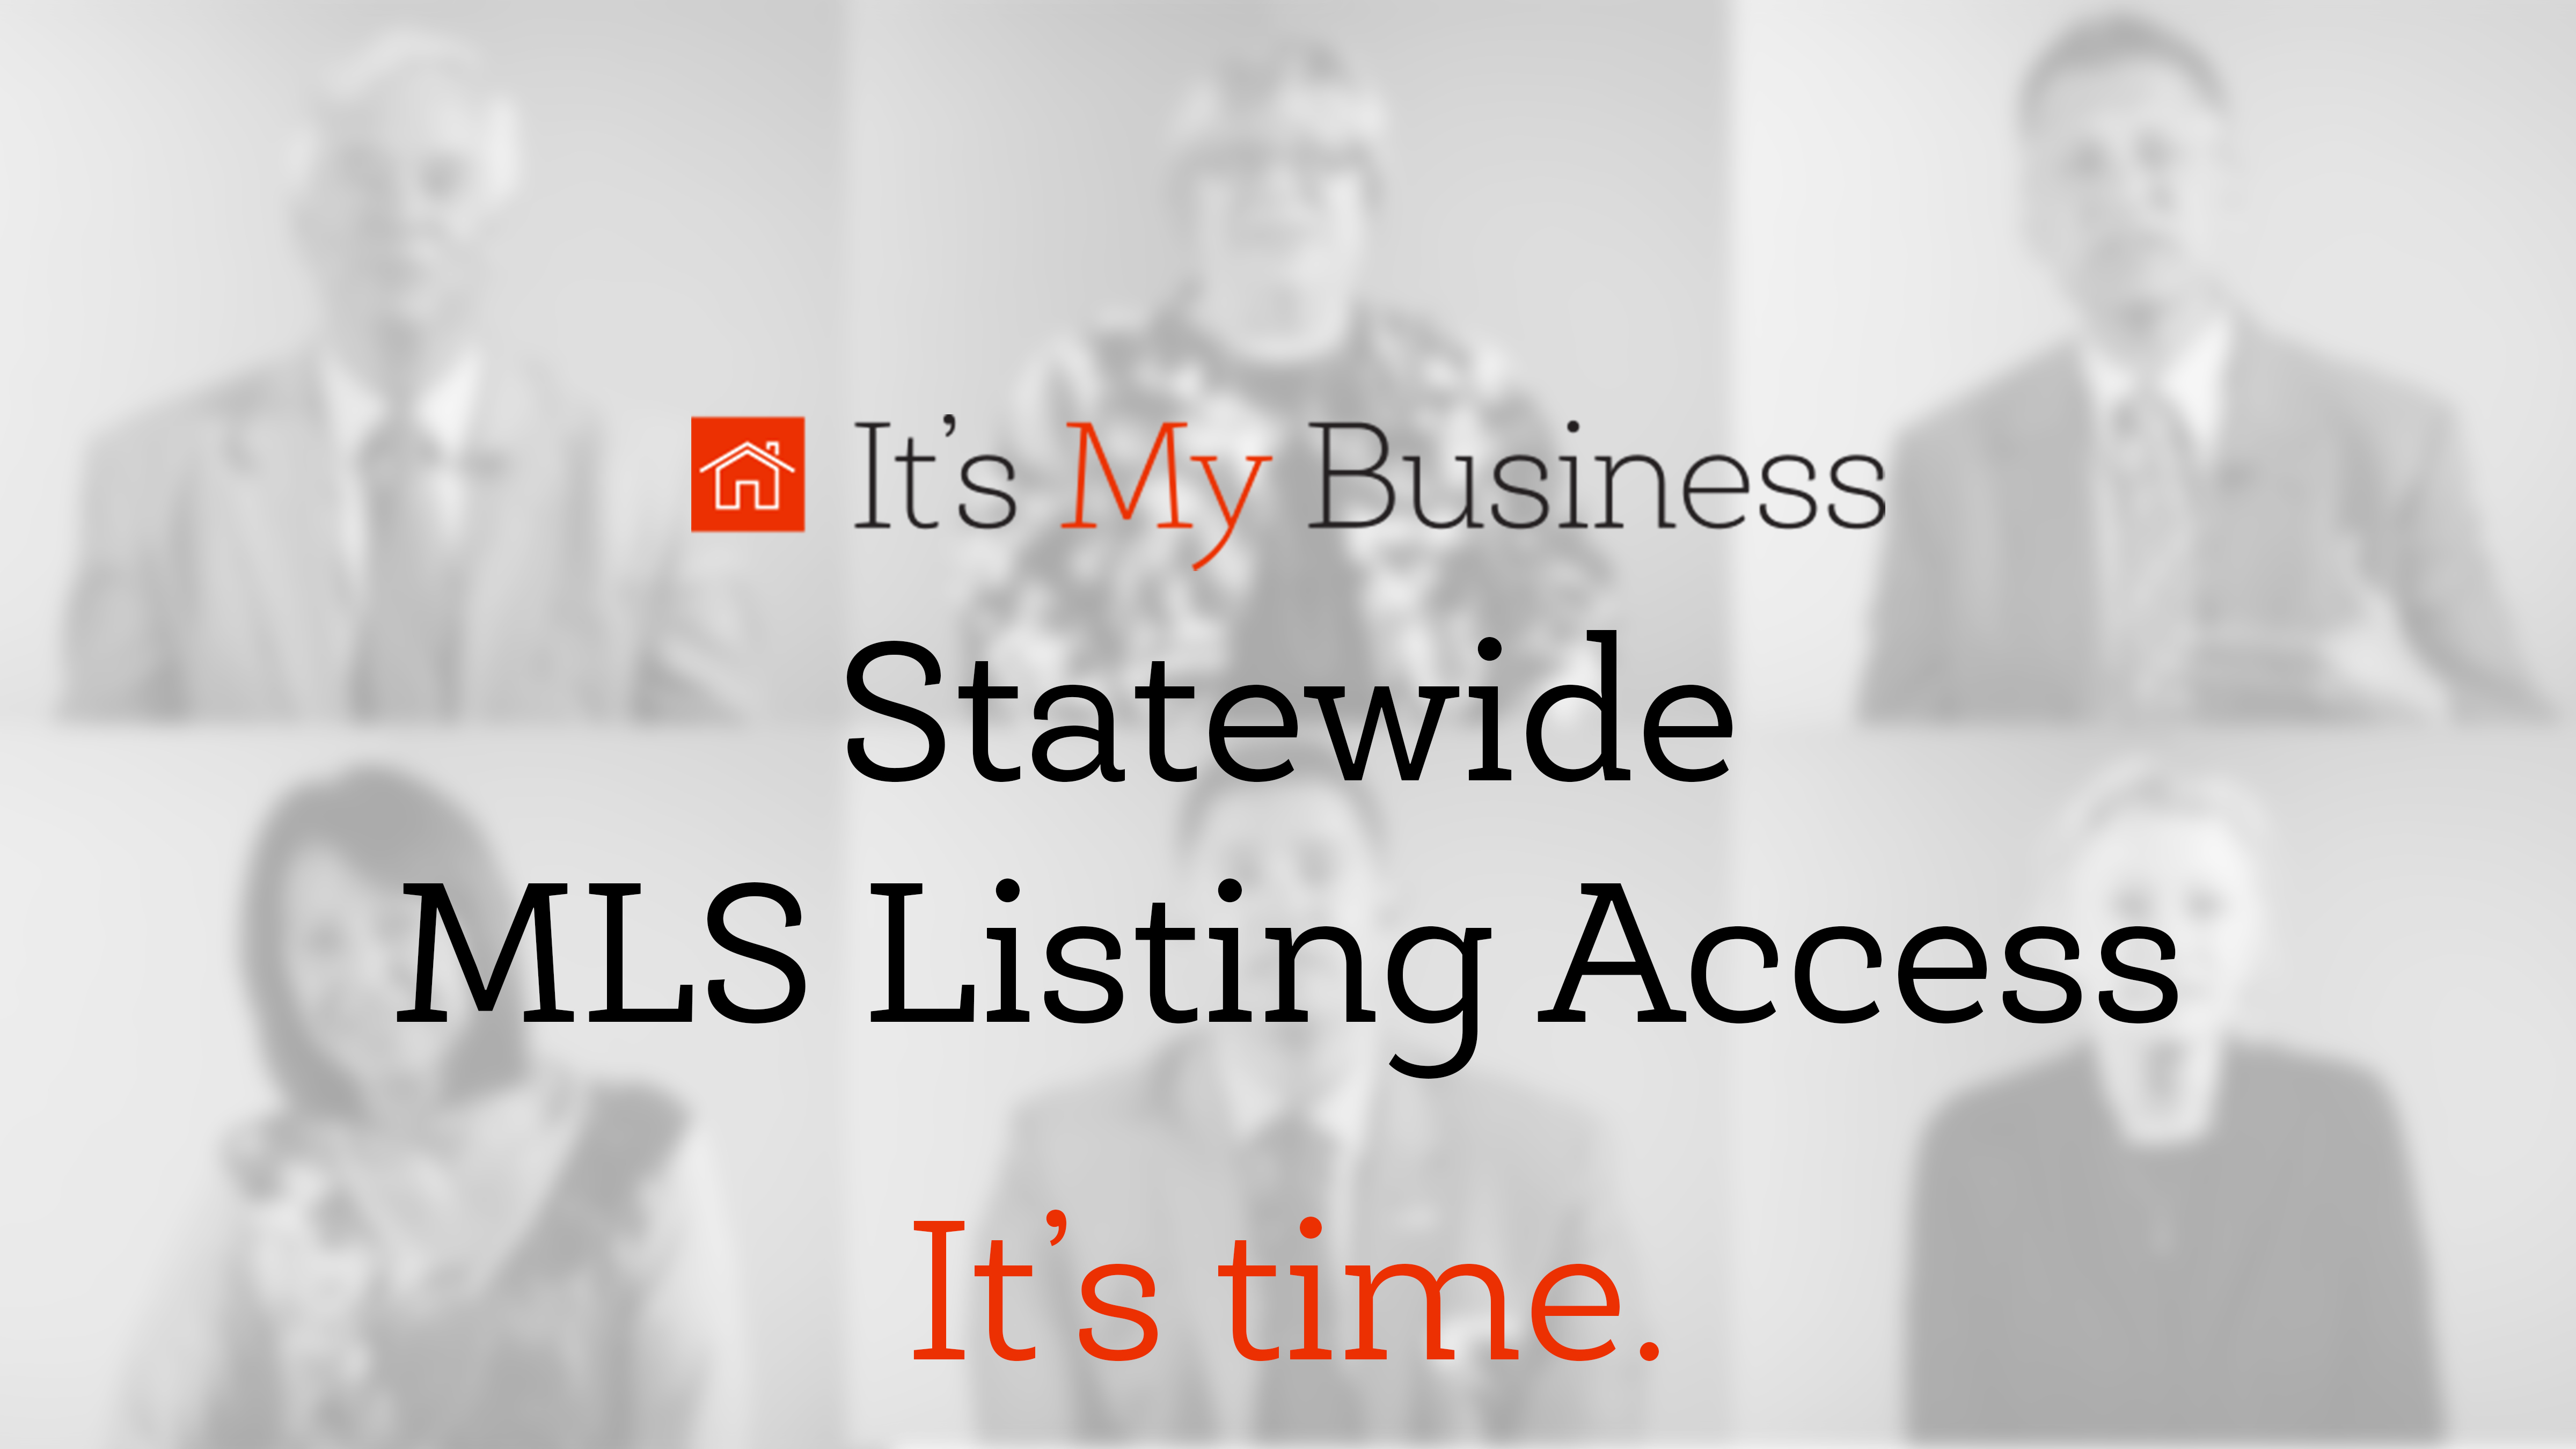 You are currently viewing Industry Leaders Support Statewide MLS Access in New Video From It’s My Business